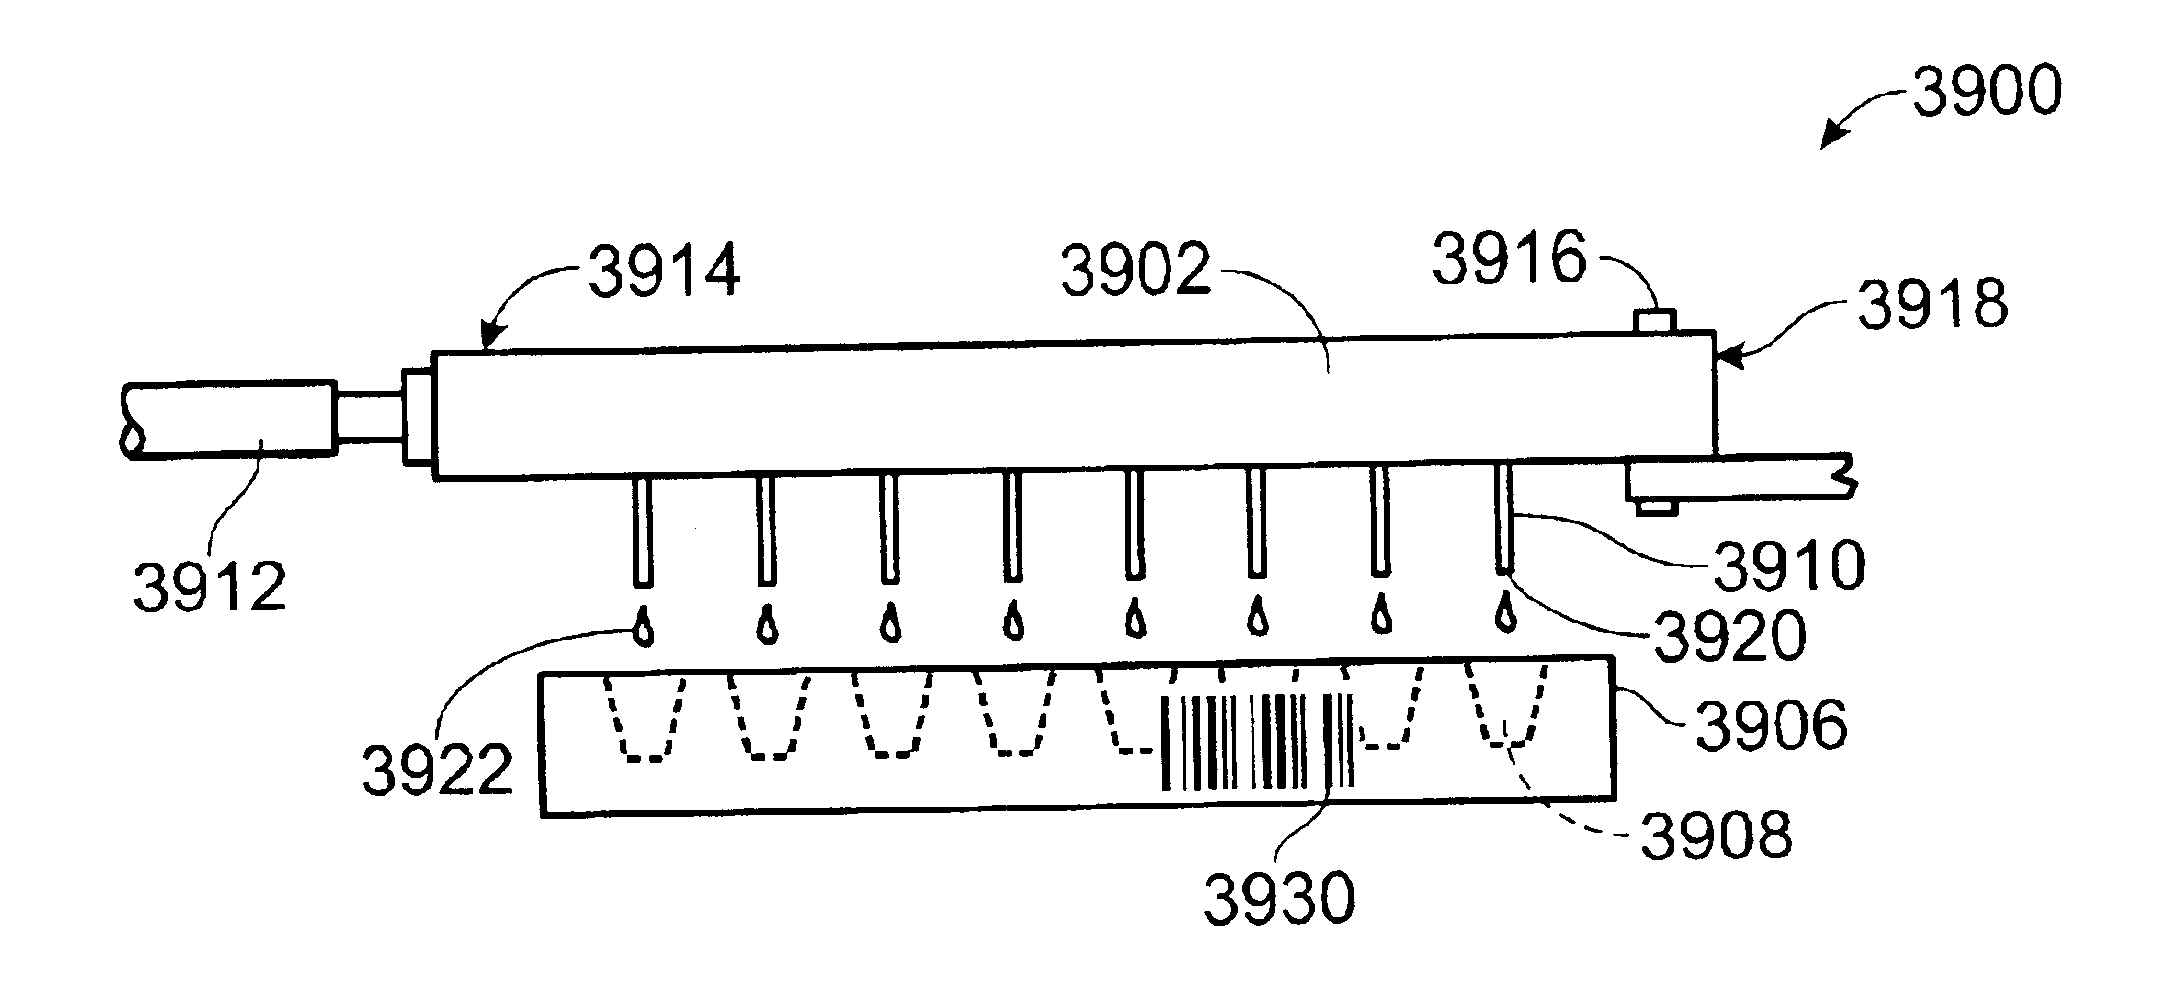 Integrated sample-processing system